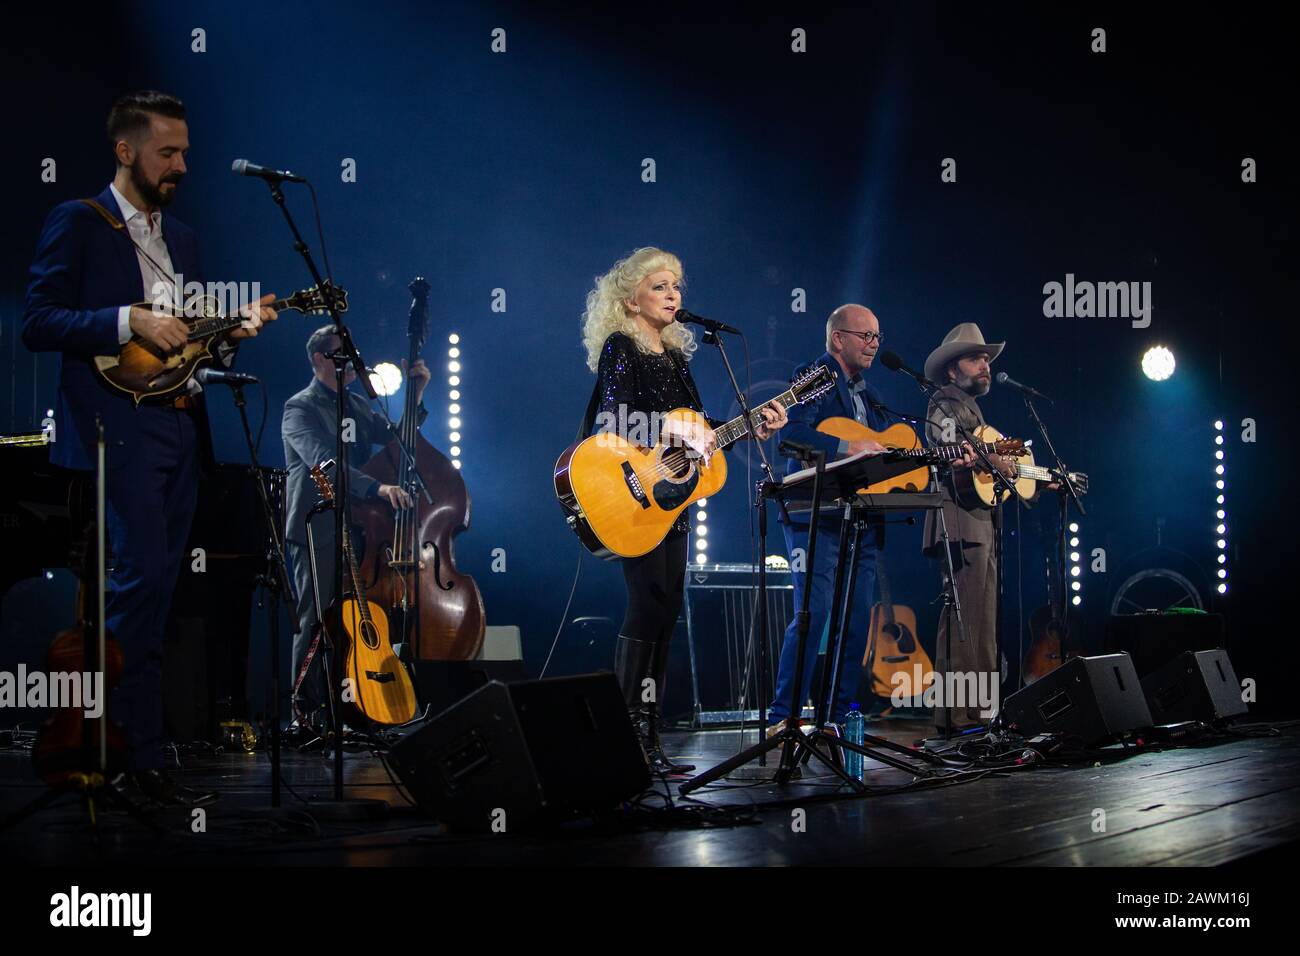 Oslo, Norway. 08th, February 2020. Judy Collins and Jonas Fjeld perform a live concert with the backing band Chatham County Line at Den Norske Opera in Oslo. (Photo credit: Gonzales Photo - Tord Litleskare). Stock Photo